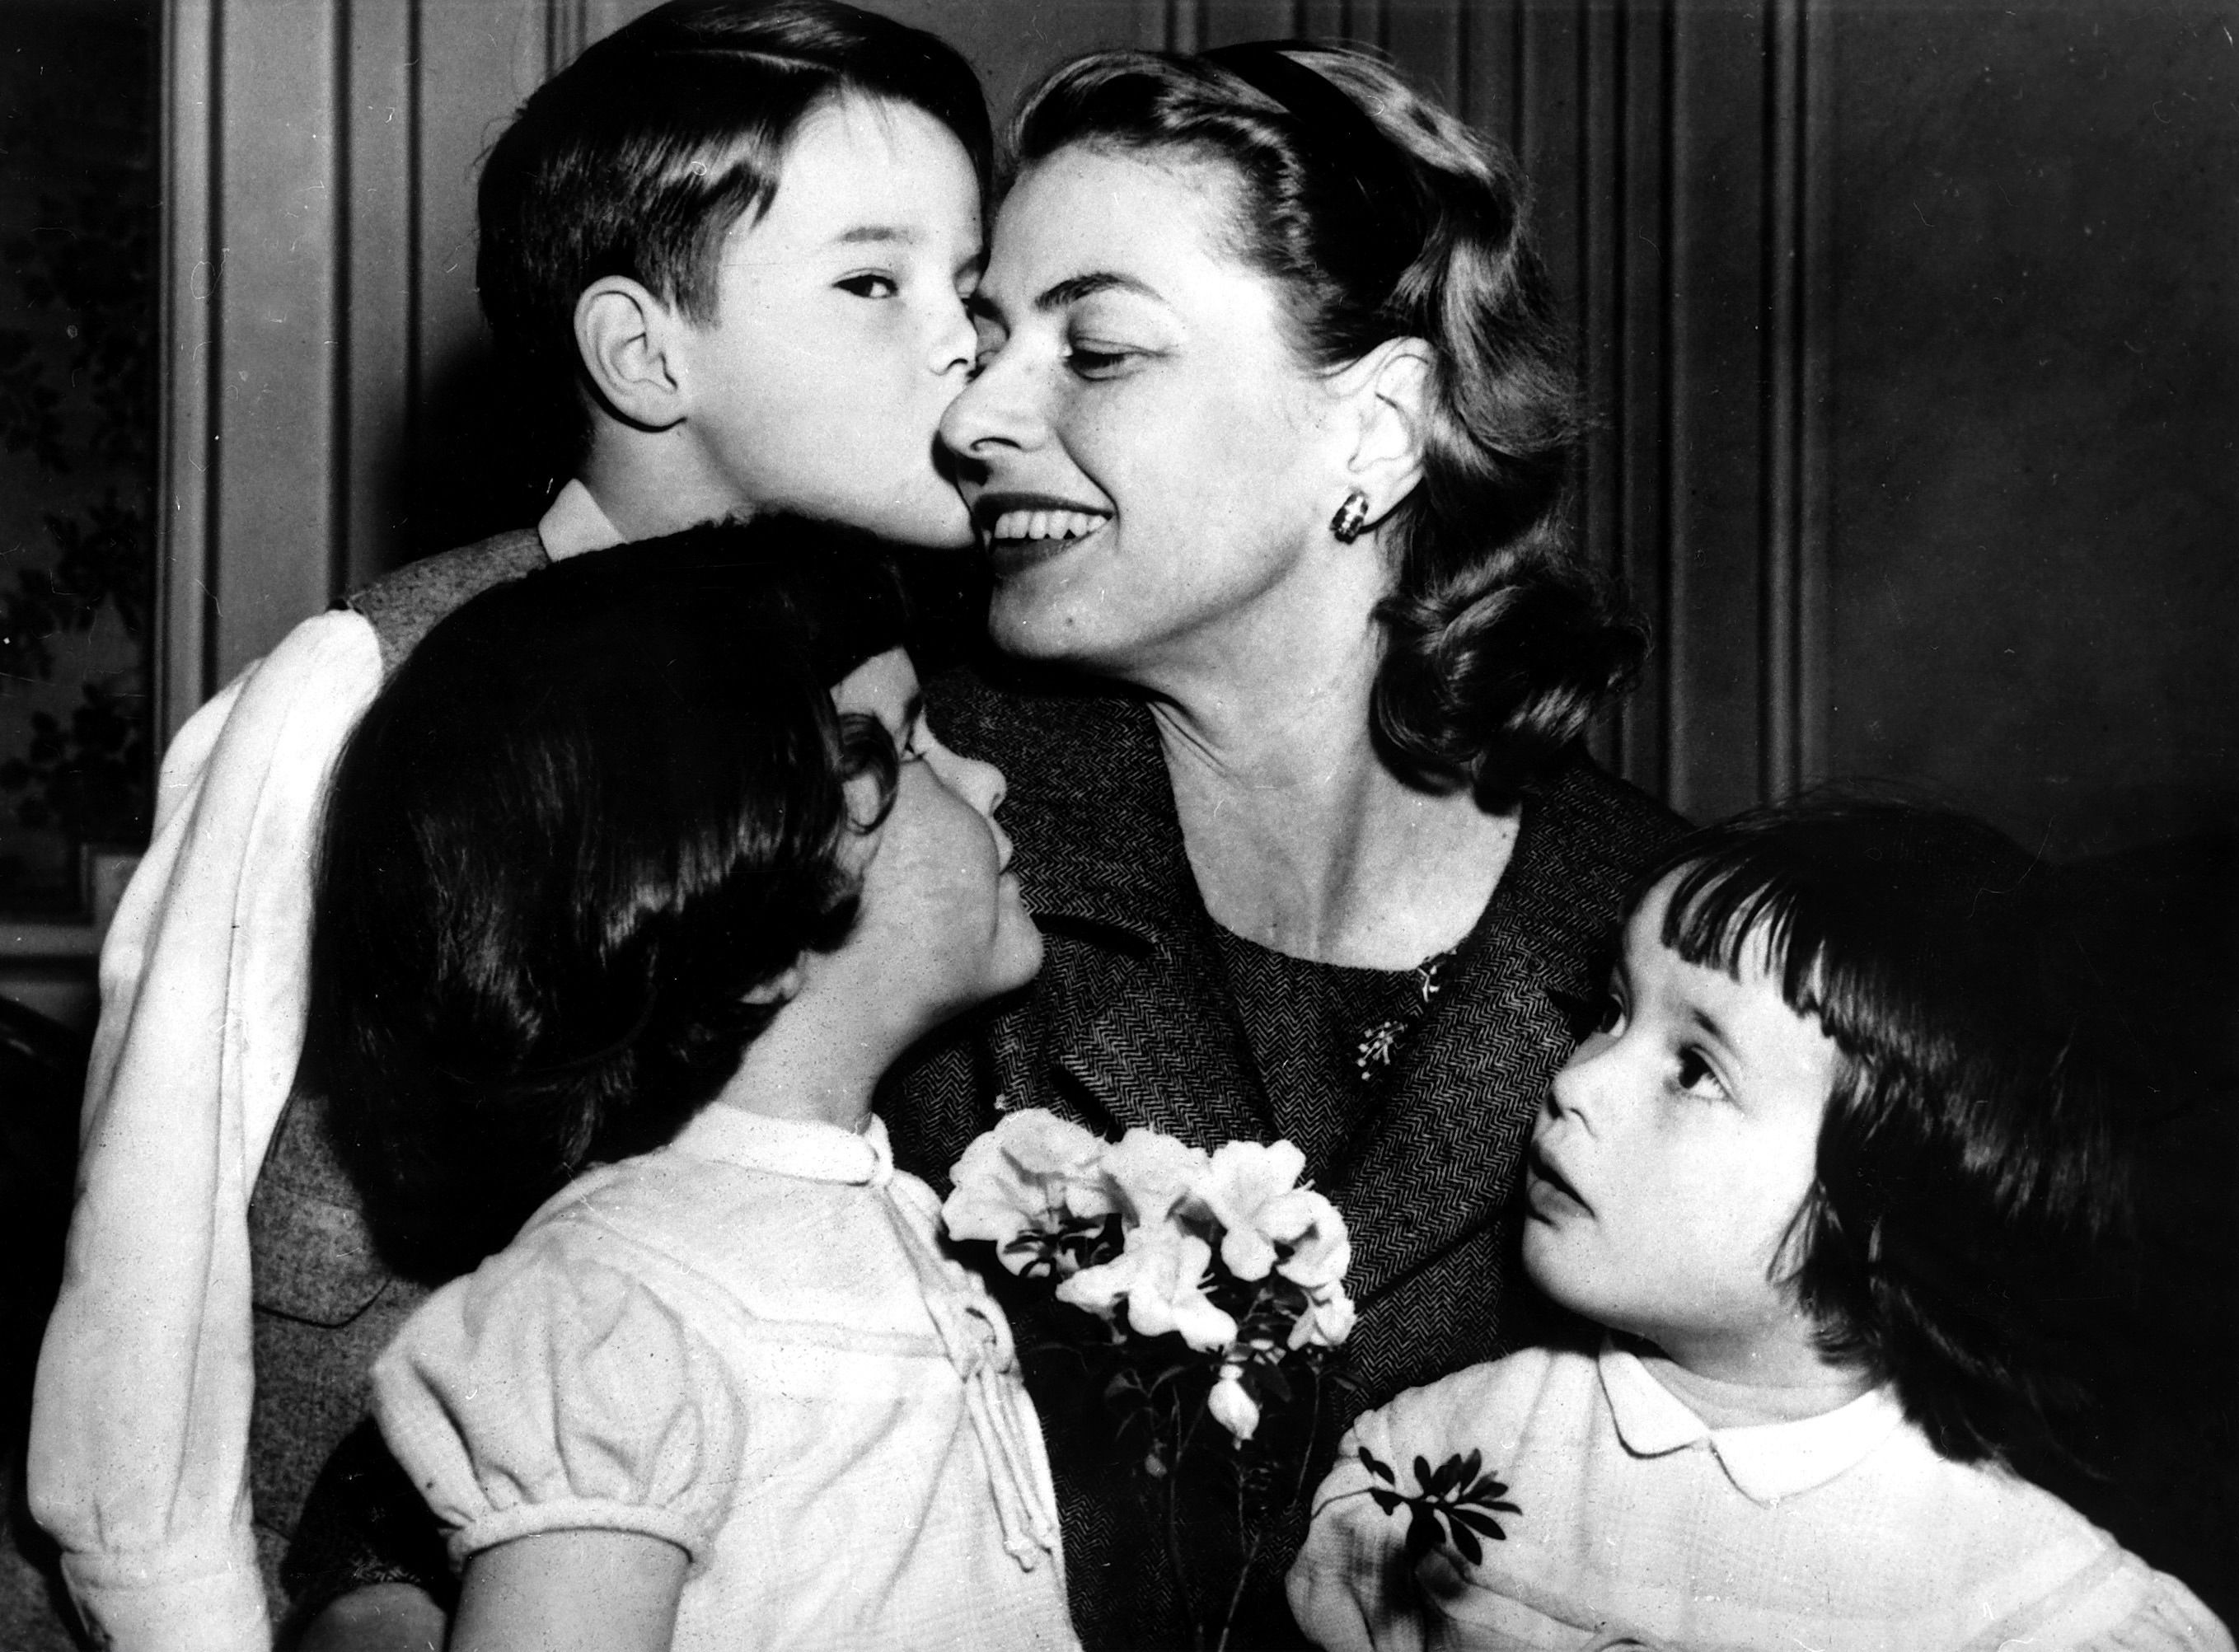 Ingrid Bergman with the three children she shared with Roberto Rossellini: Isabella, Ingrid, and Roberto Jr. | Source: Getty Images